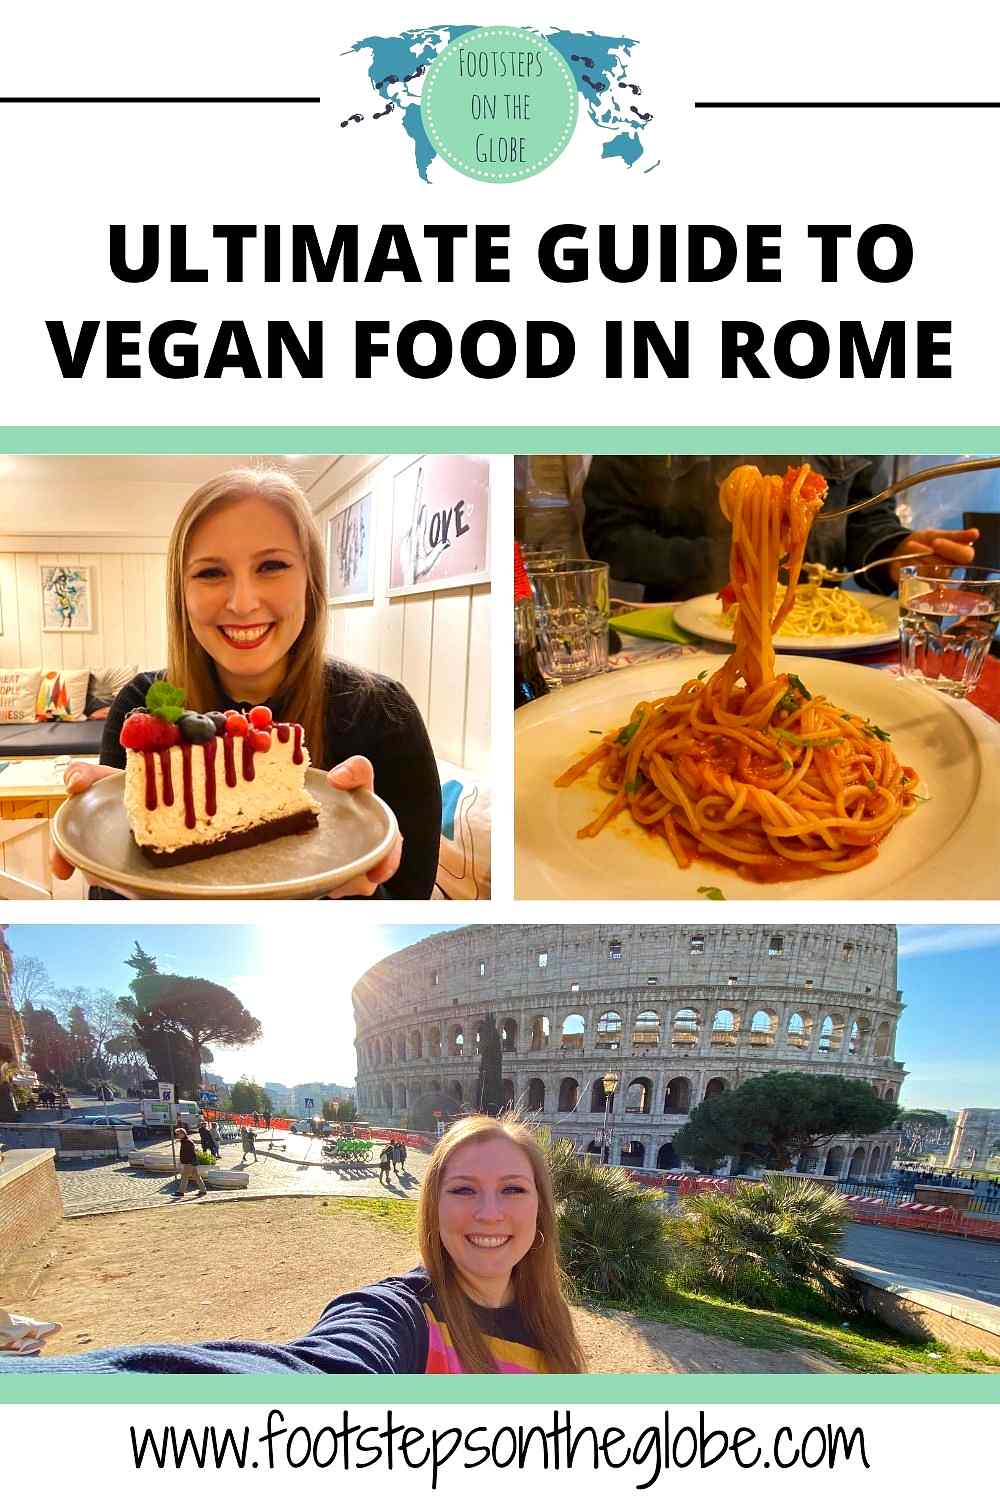 Pinterest image of Mel in front of the Colosseum and eating cake and spaghetti with the text: "Ultimate guide to vegan food in Rome"